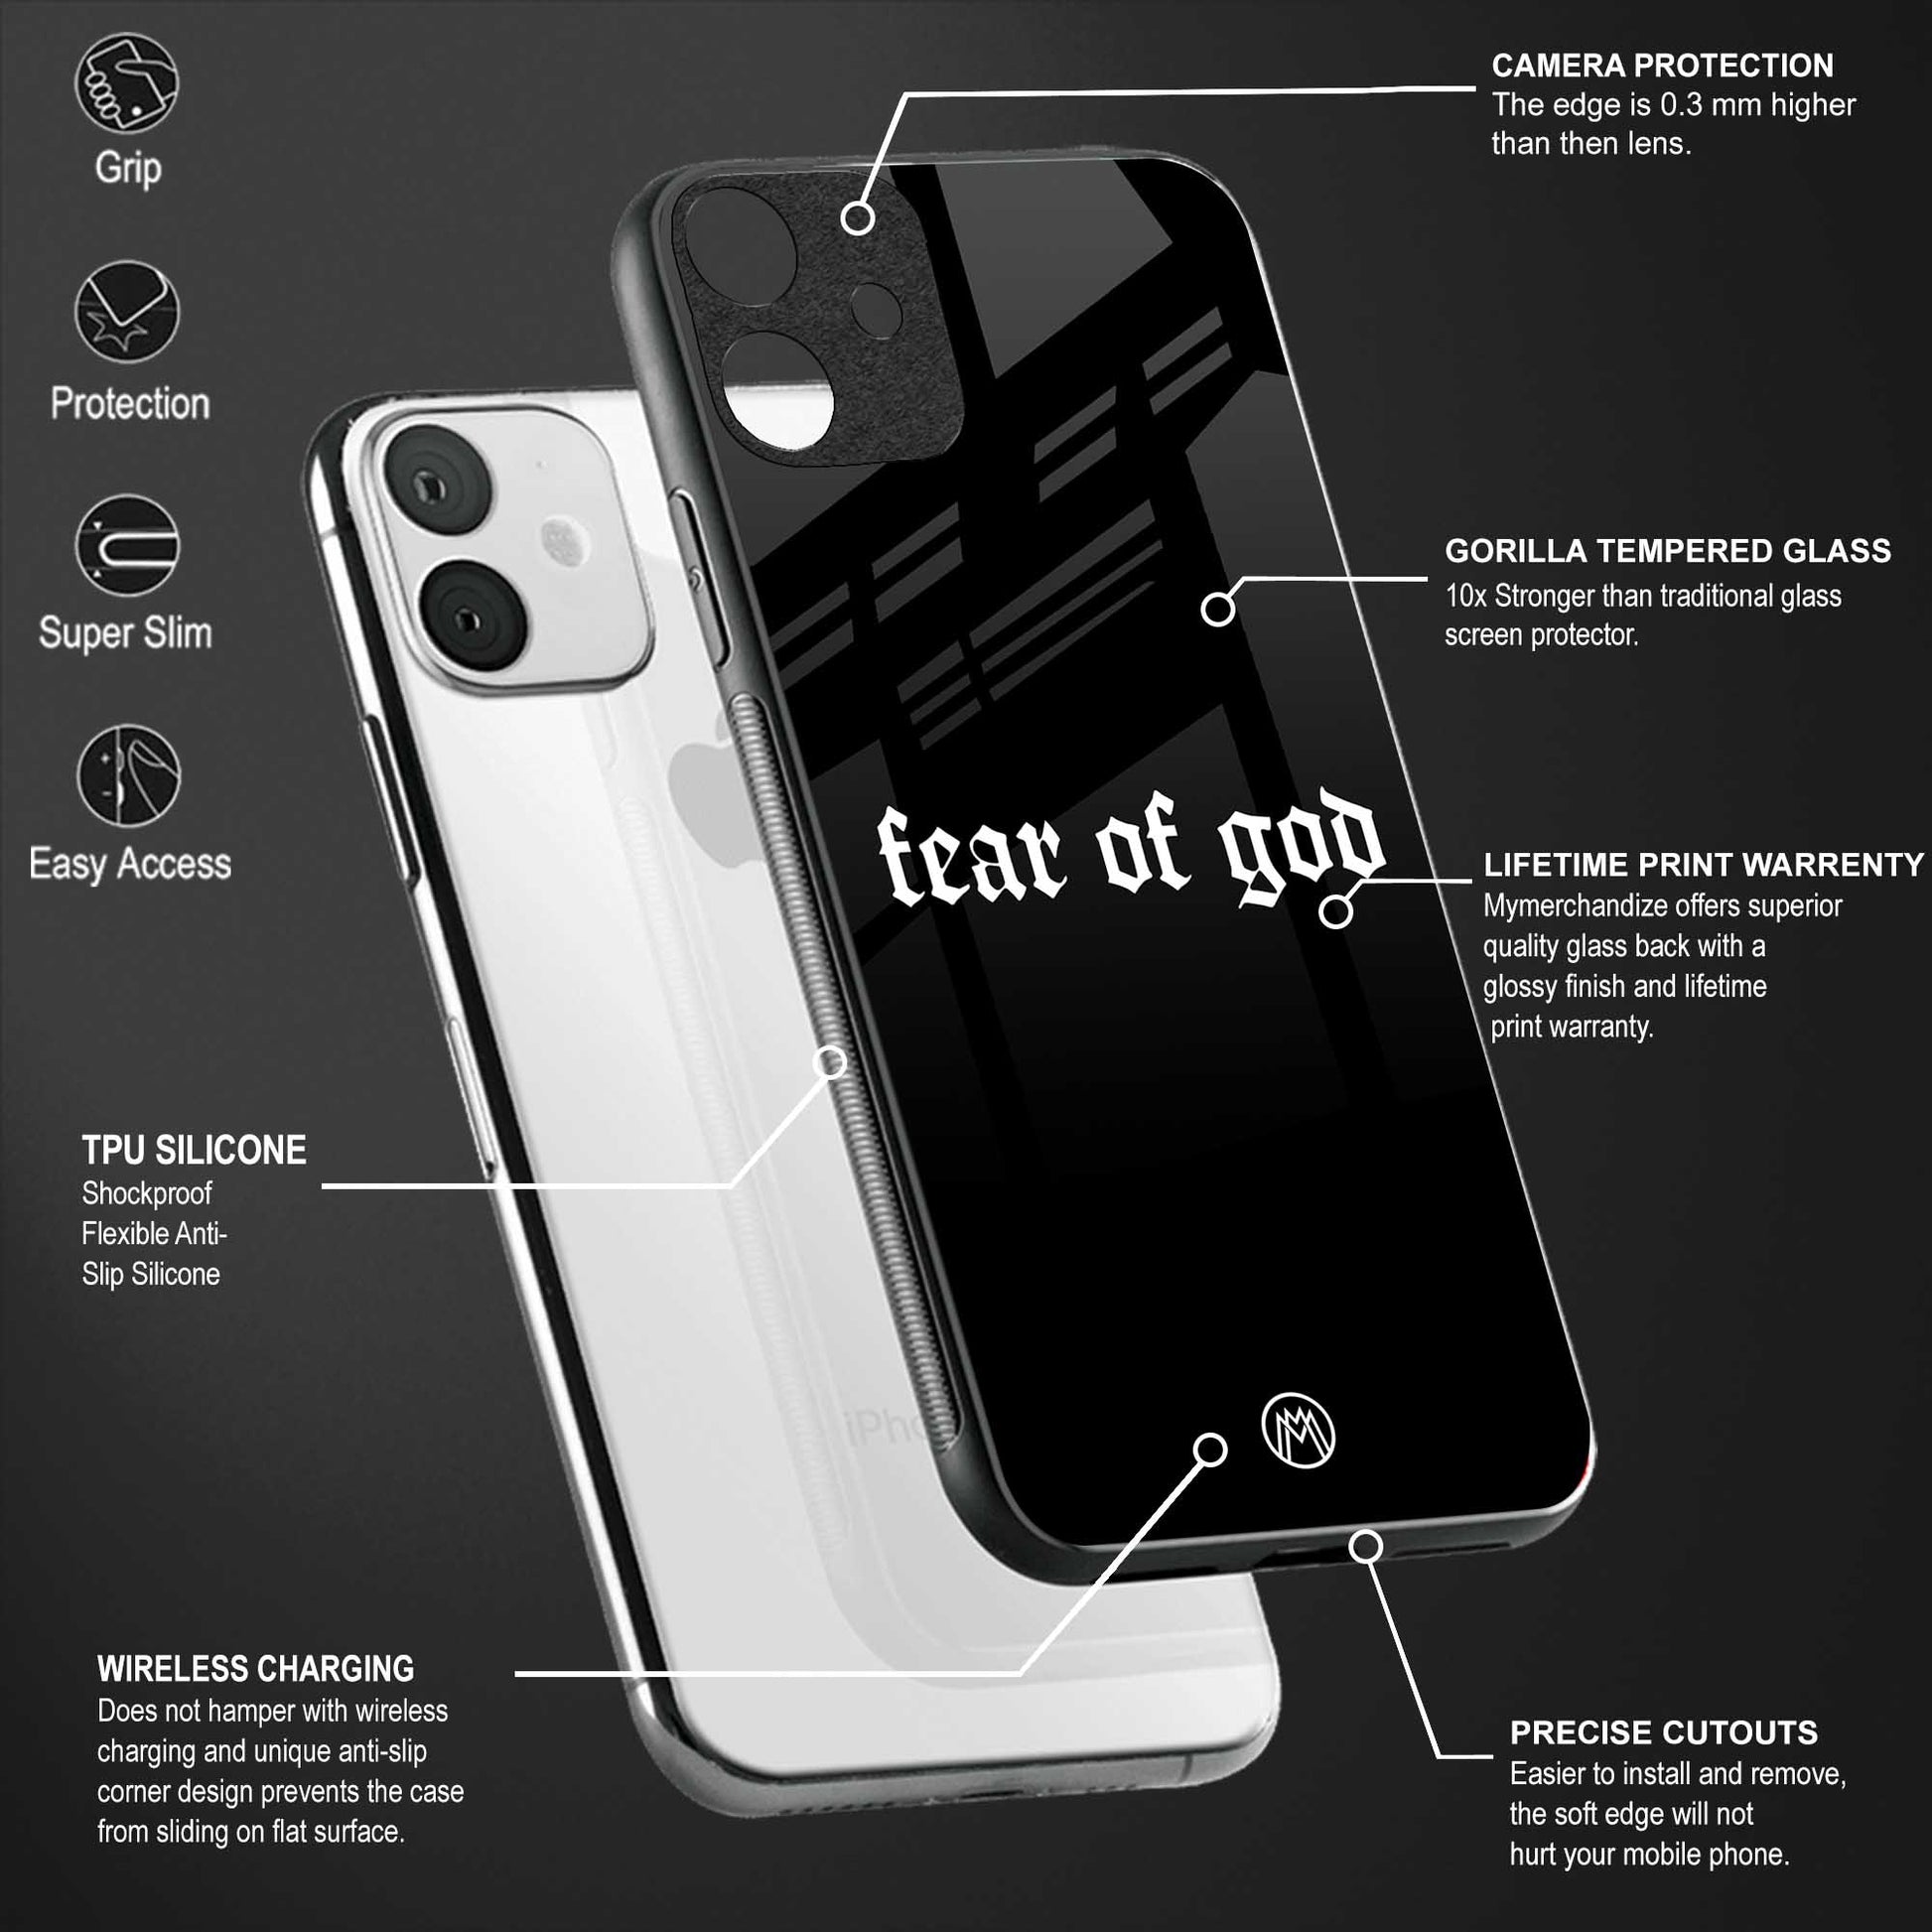 fear of god phone cover for vivo z1x